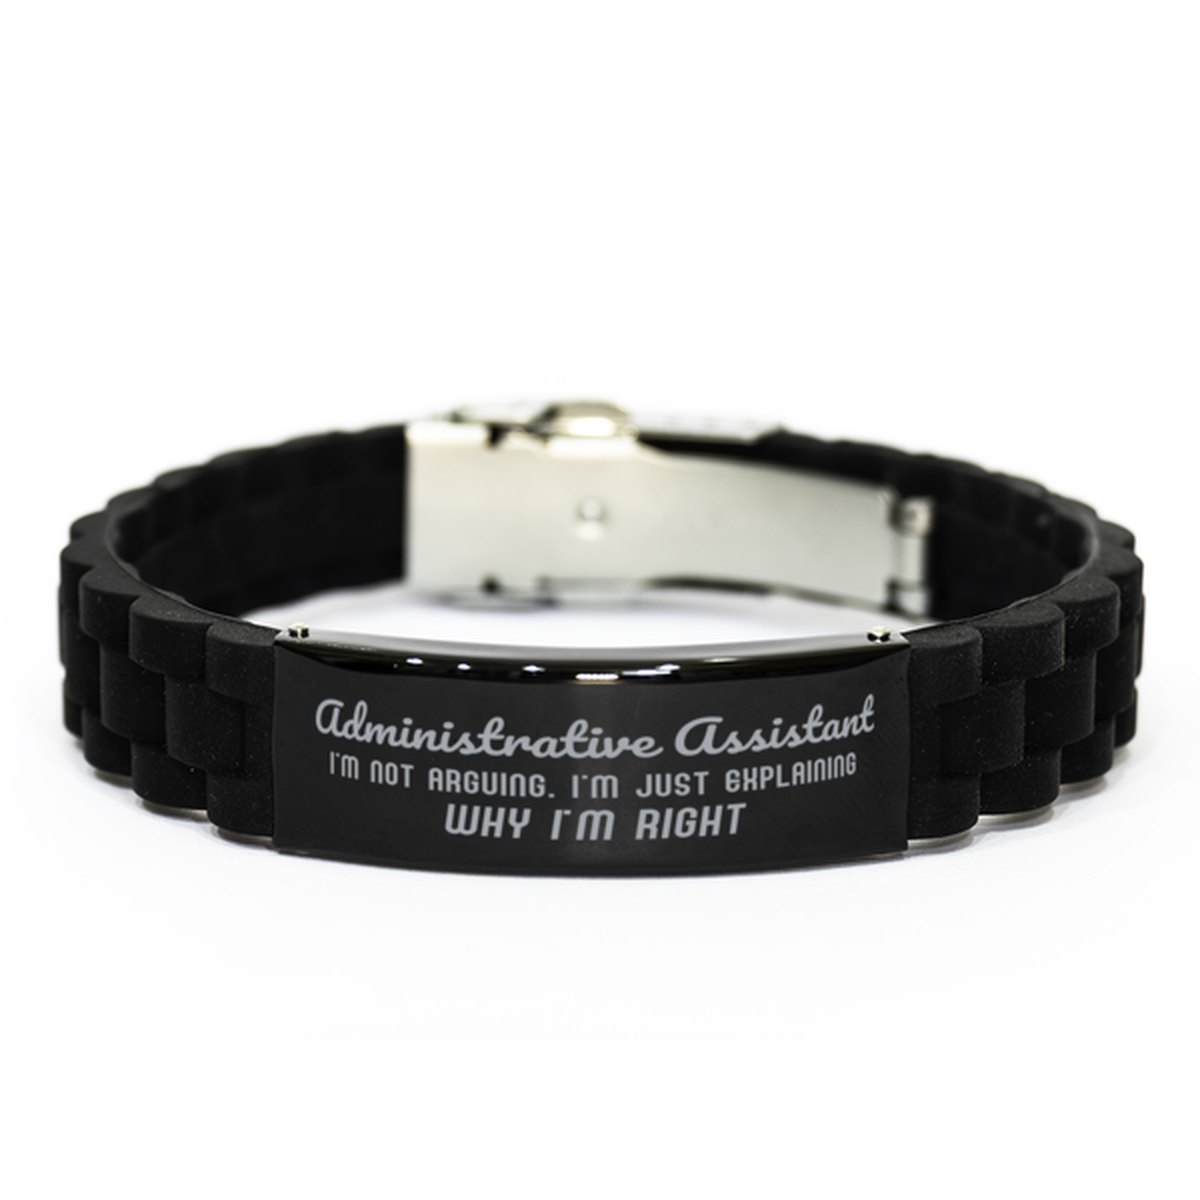 Administrative Assistant I'm not Arguing. I'm Just Explaining Why I'm RIGHT Black Glidelock Clasp Bracelet, Funny Saying Quote Administrative Assistant Gifts For Administrative Assistant Graduation Birthday Christmas Gifts for Men Women Coworker